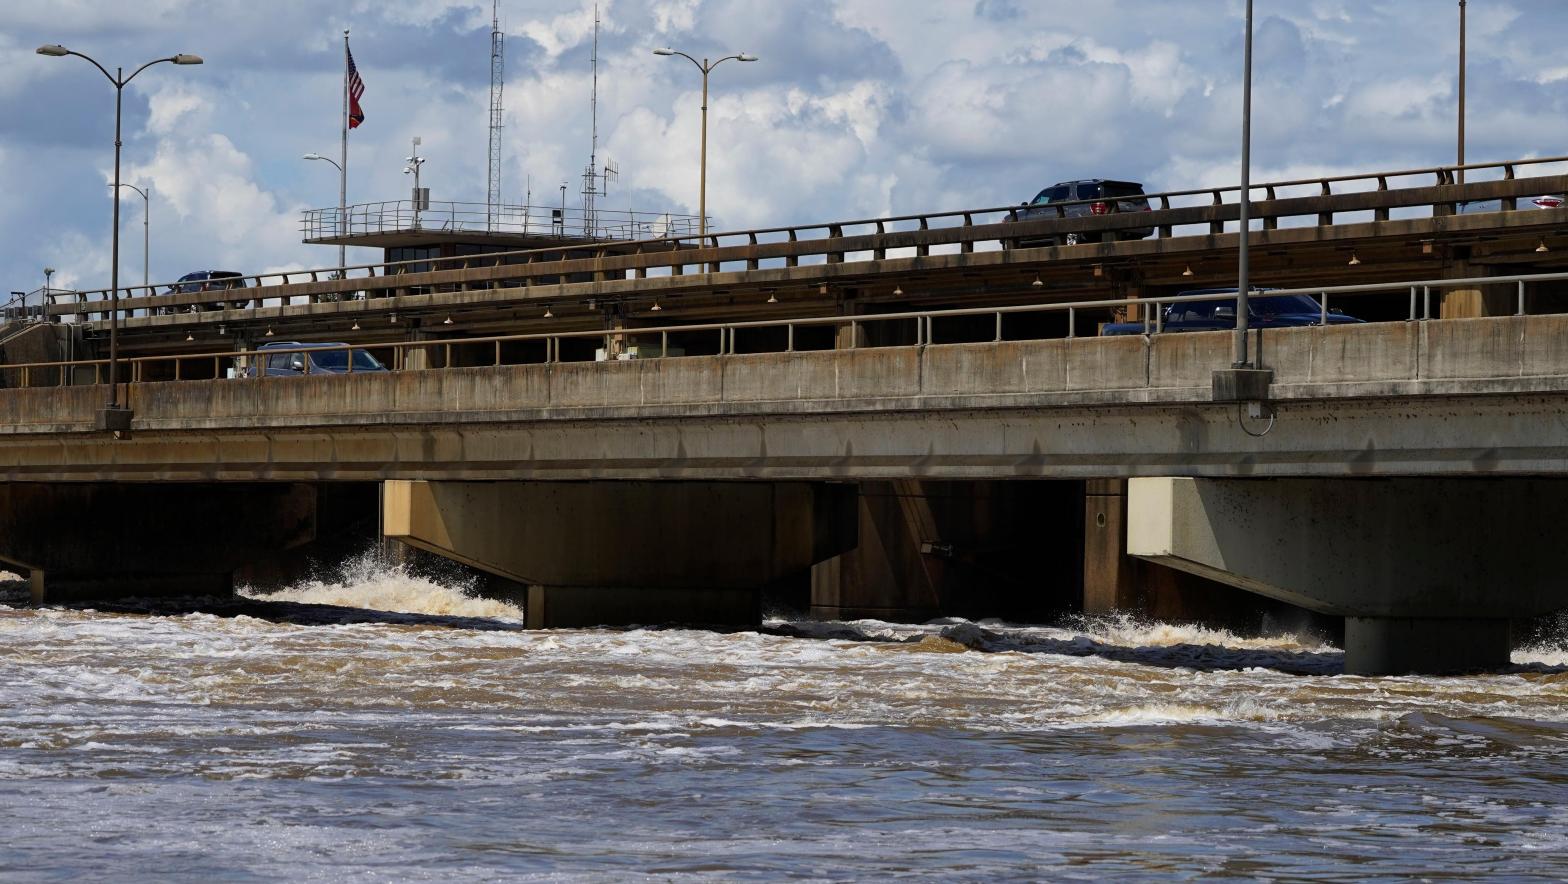 The Ross Barnett Reservoir spillway is releasing a controlled amount of flood water into the Pearl River (Image: Rogelio V. Solis, AP)